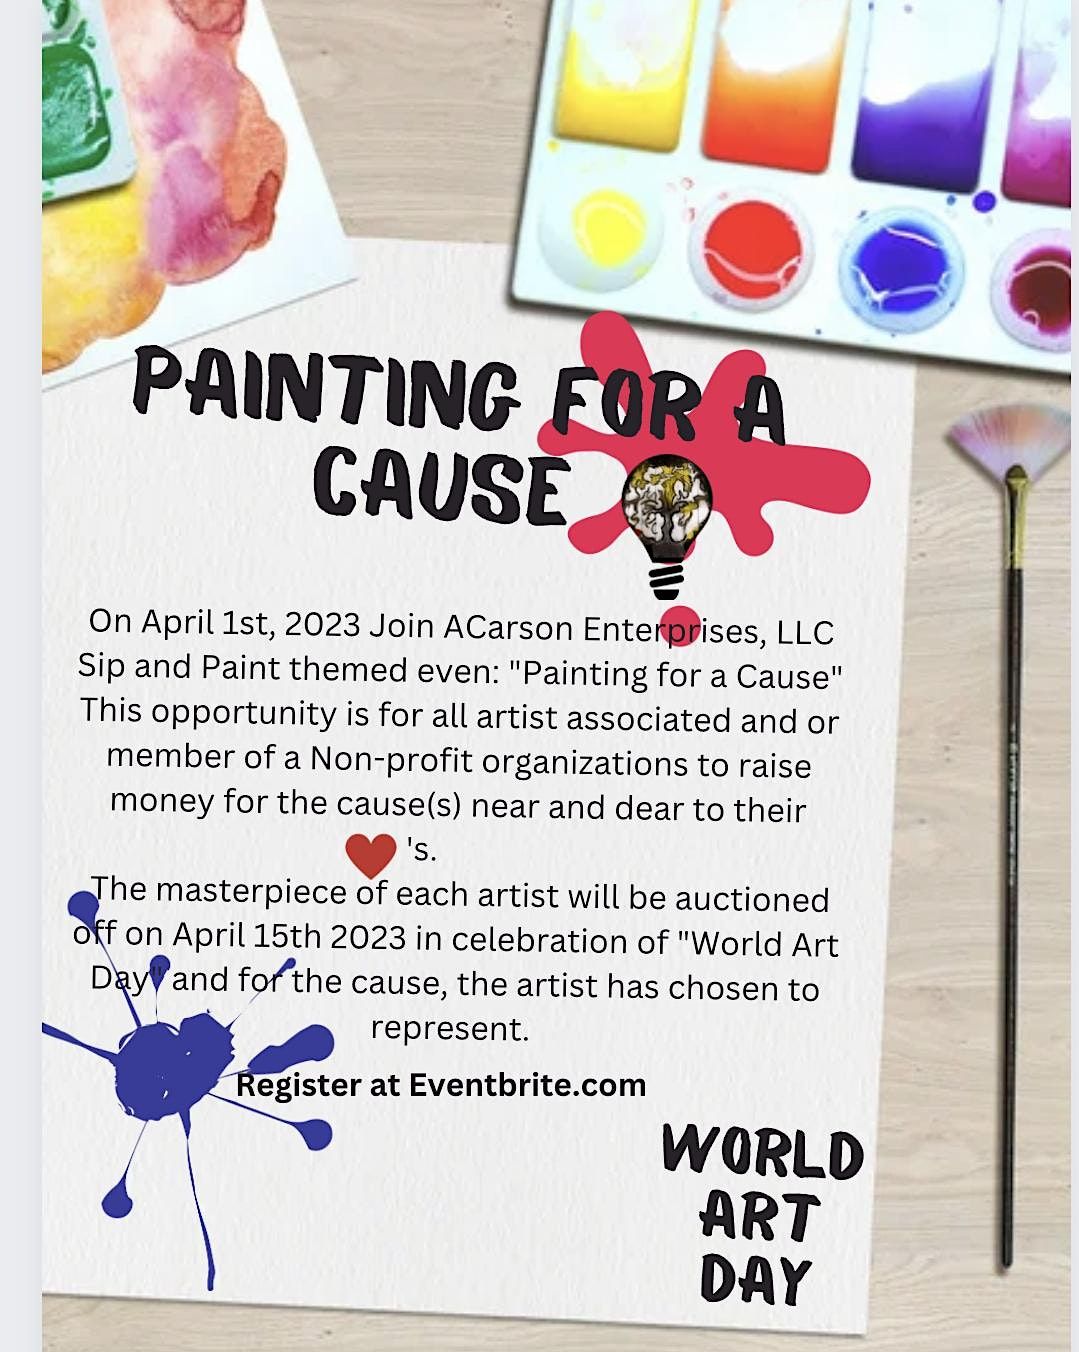 Painting for a Cause